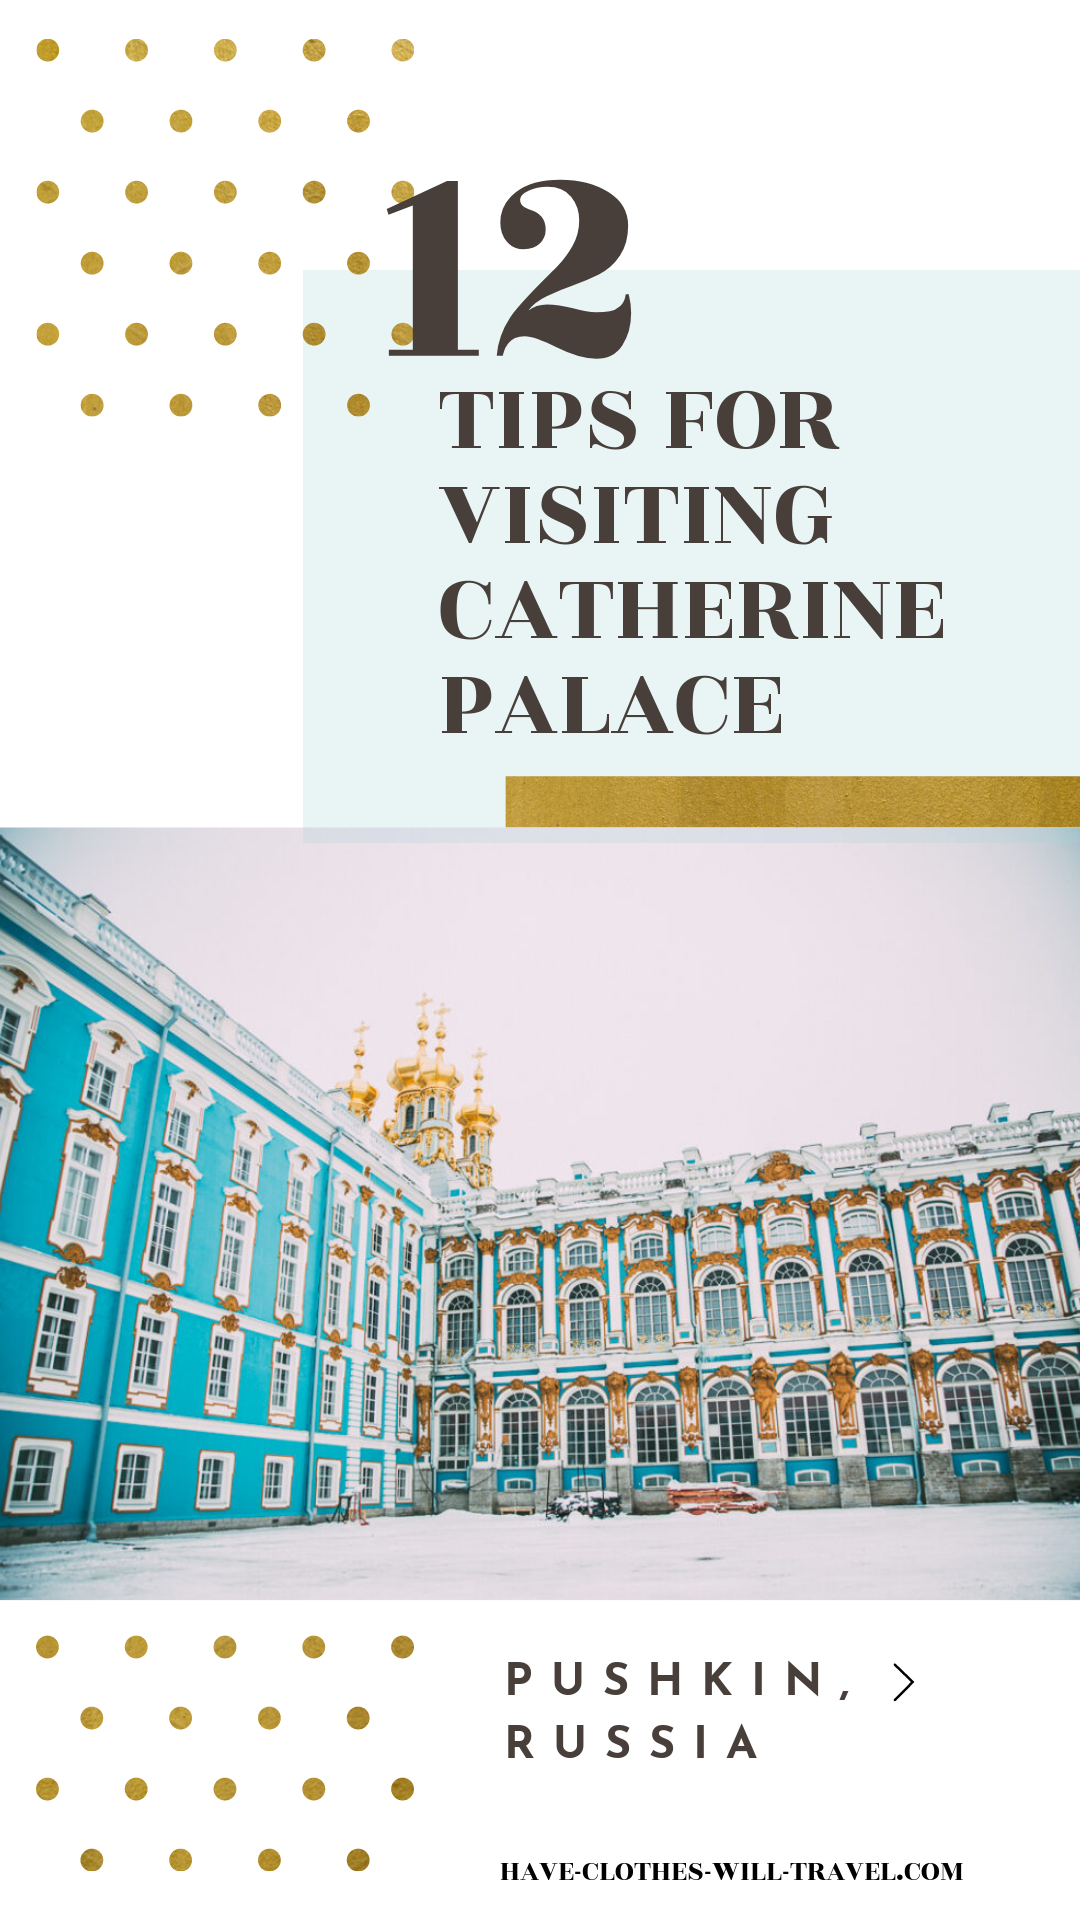 Image shows the outside of Catherine Palace with text that reads "Tips for Visiting Catherine Palace in Puskin Russia"